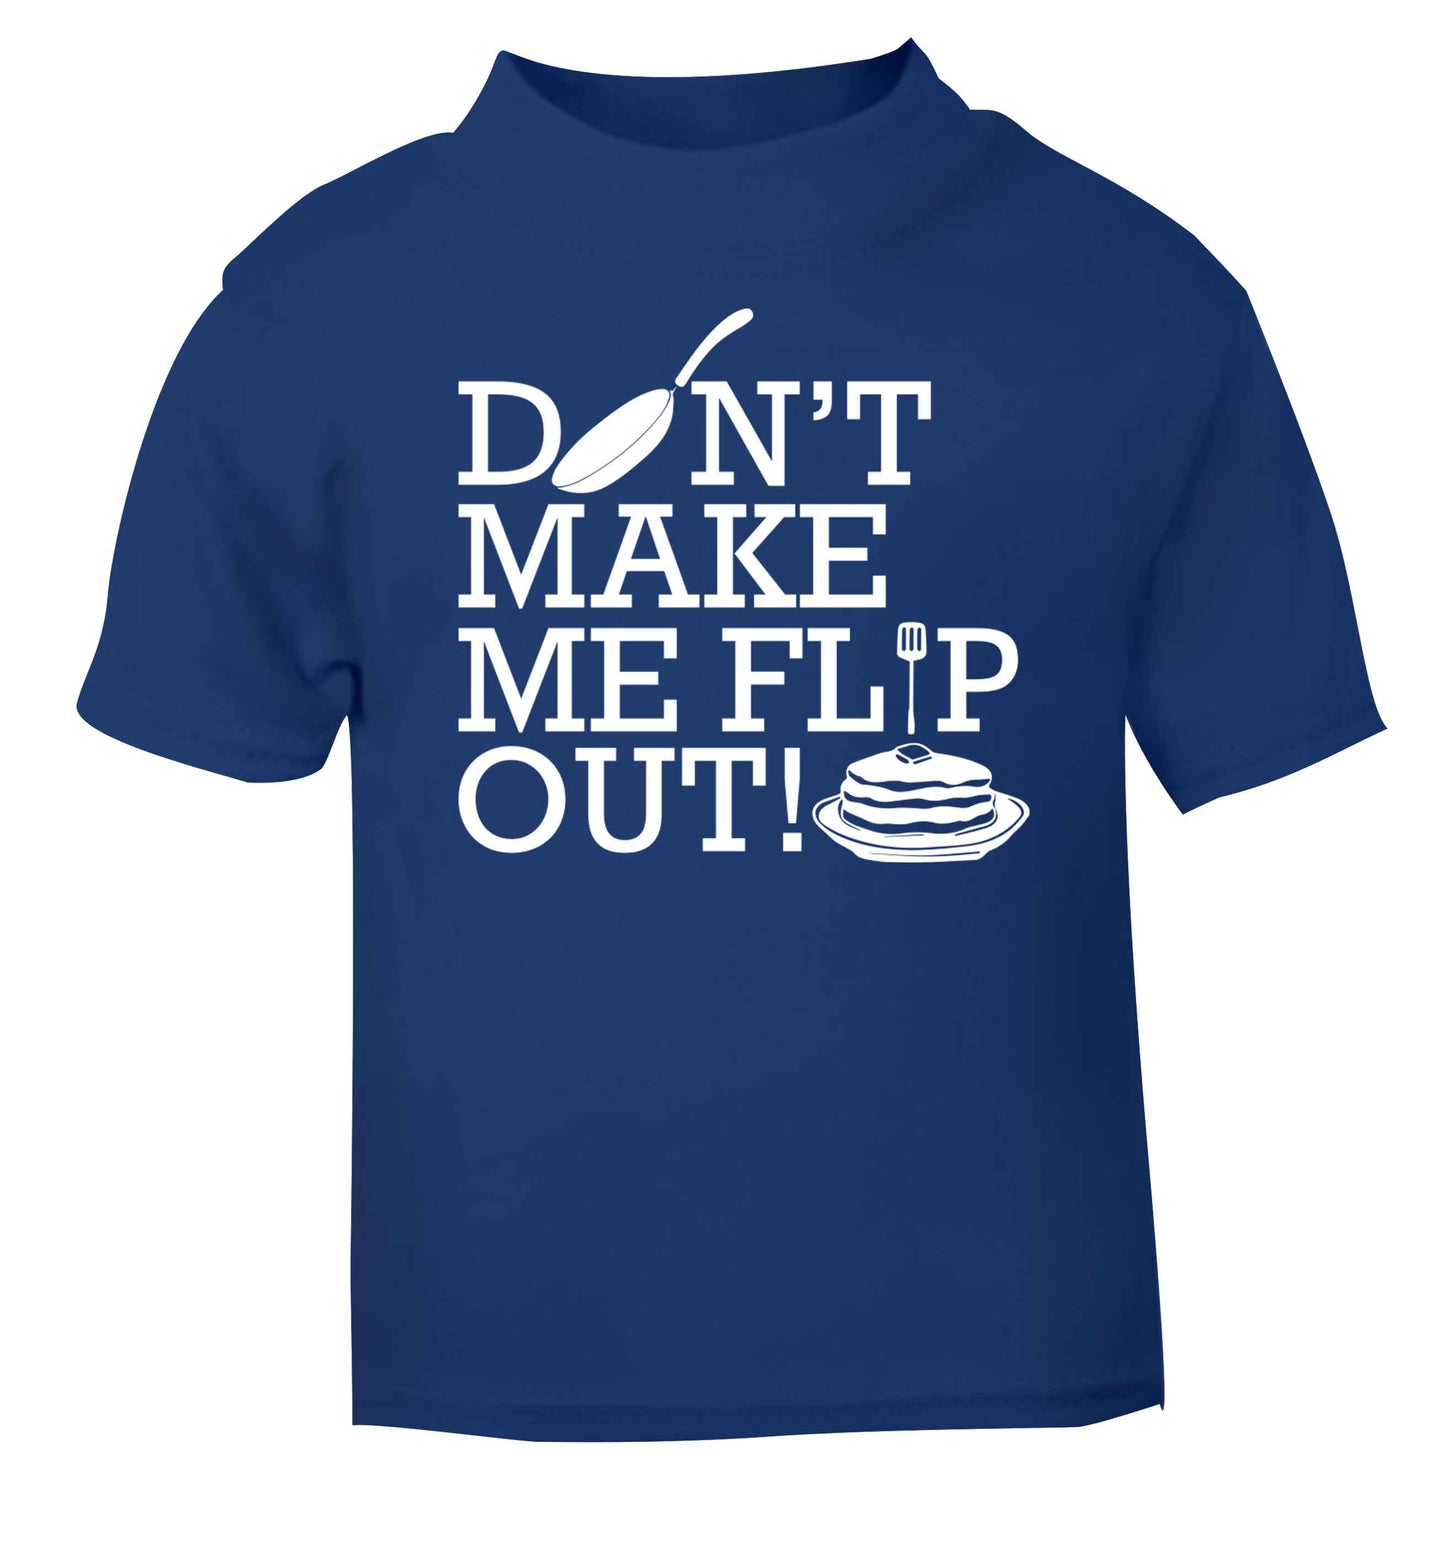 Don't make me flip out blue baby toddler Tshirt 2 Years